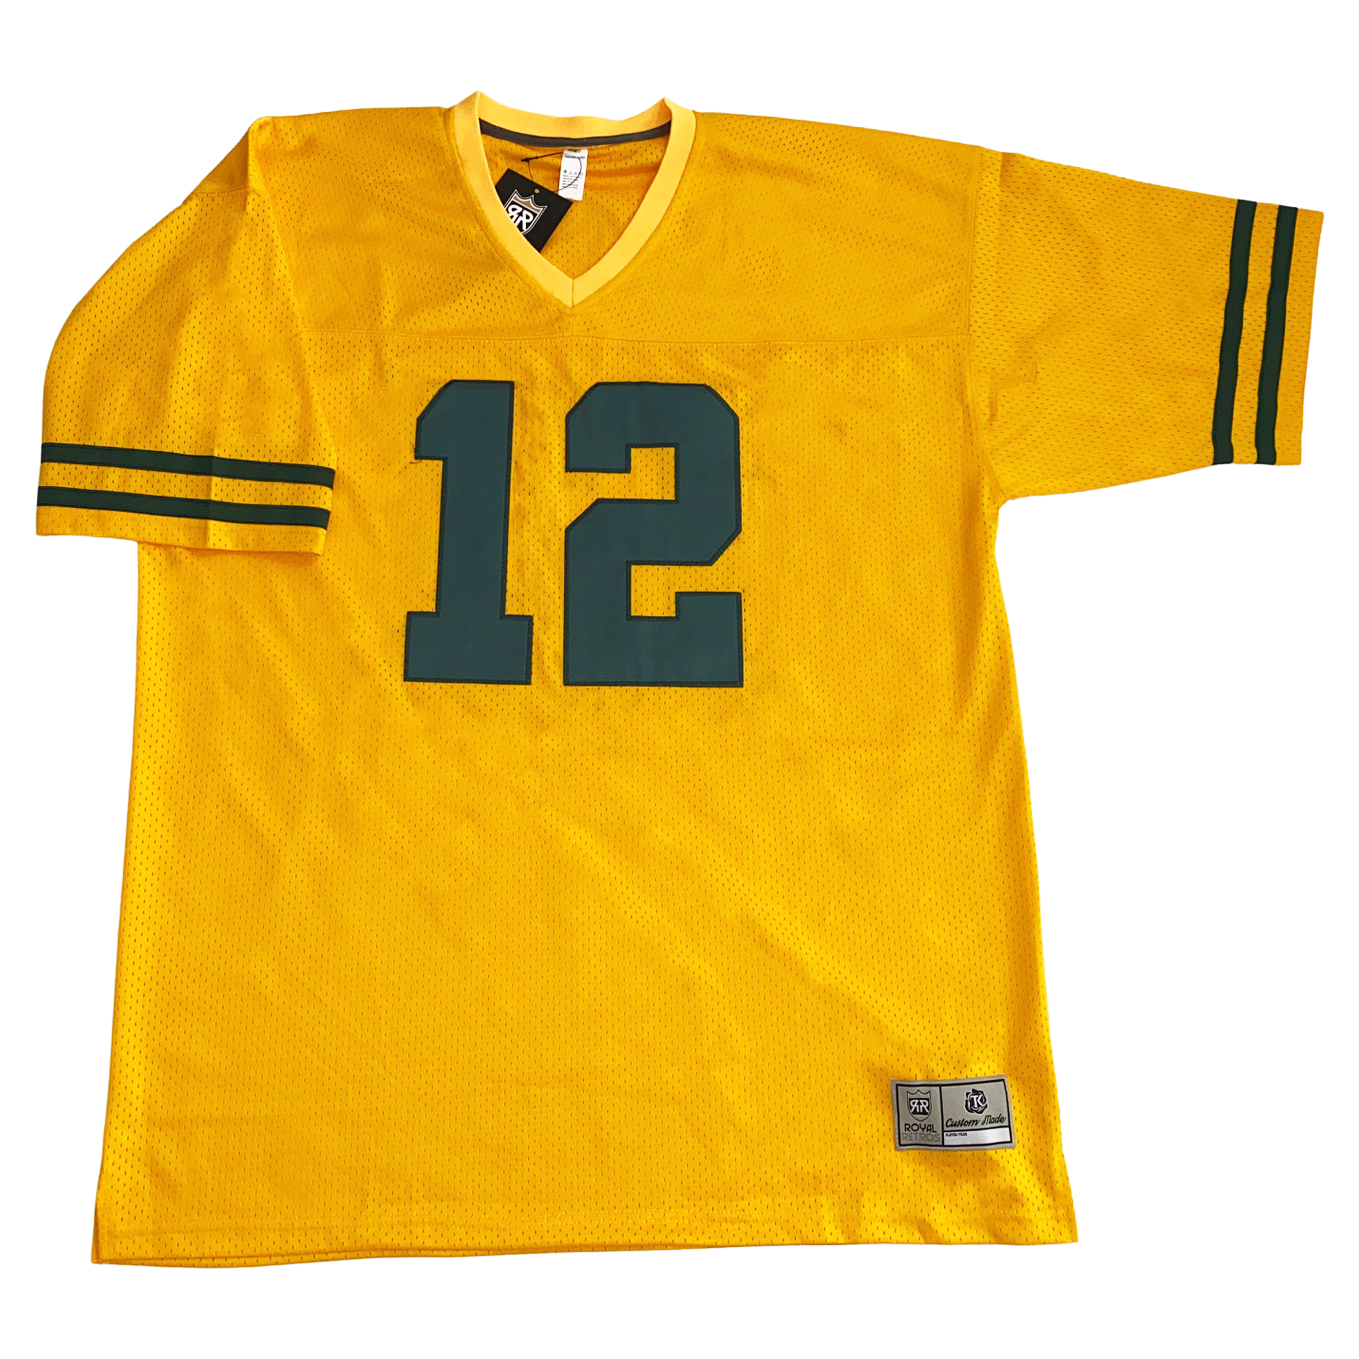 1952 green bay packers jersey